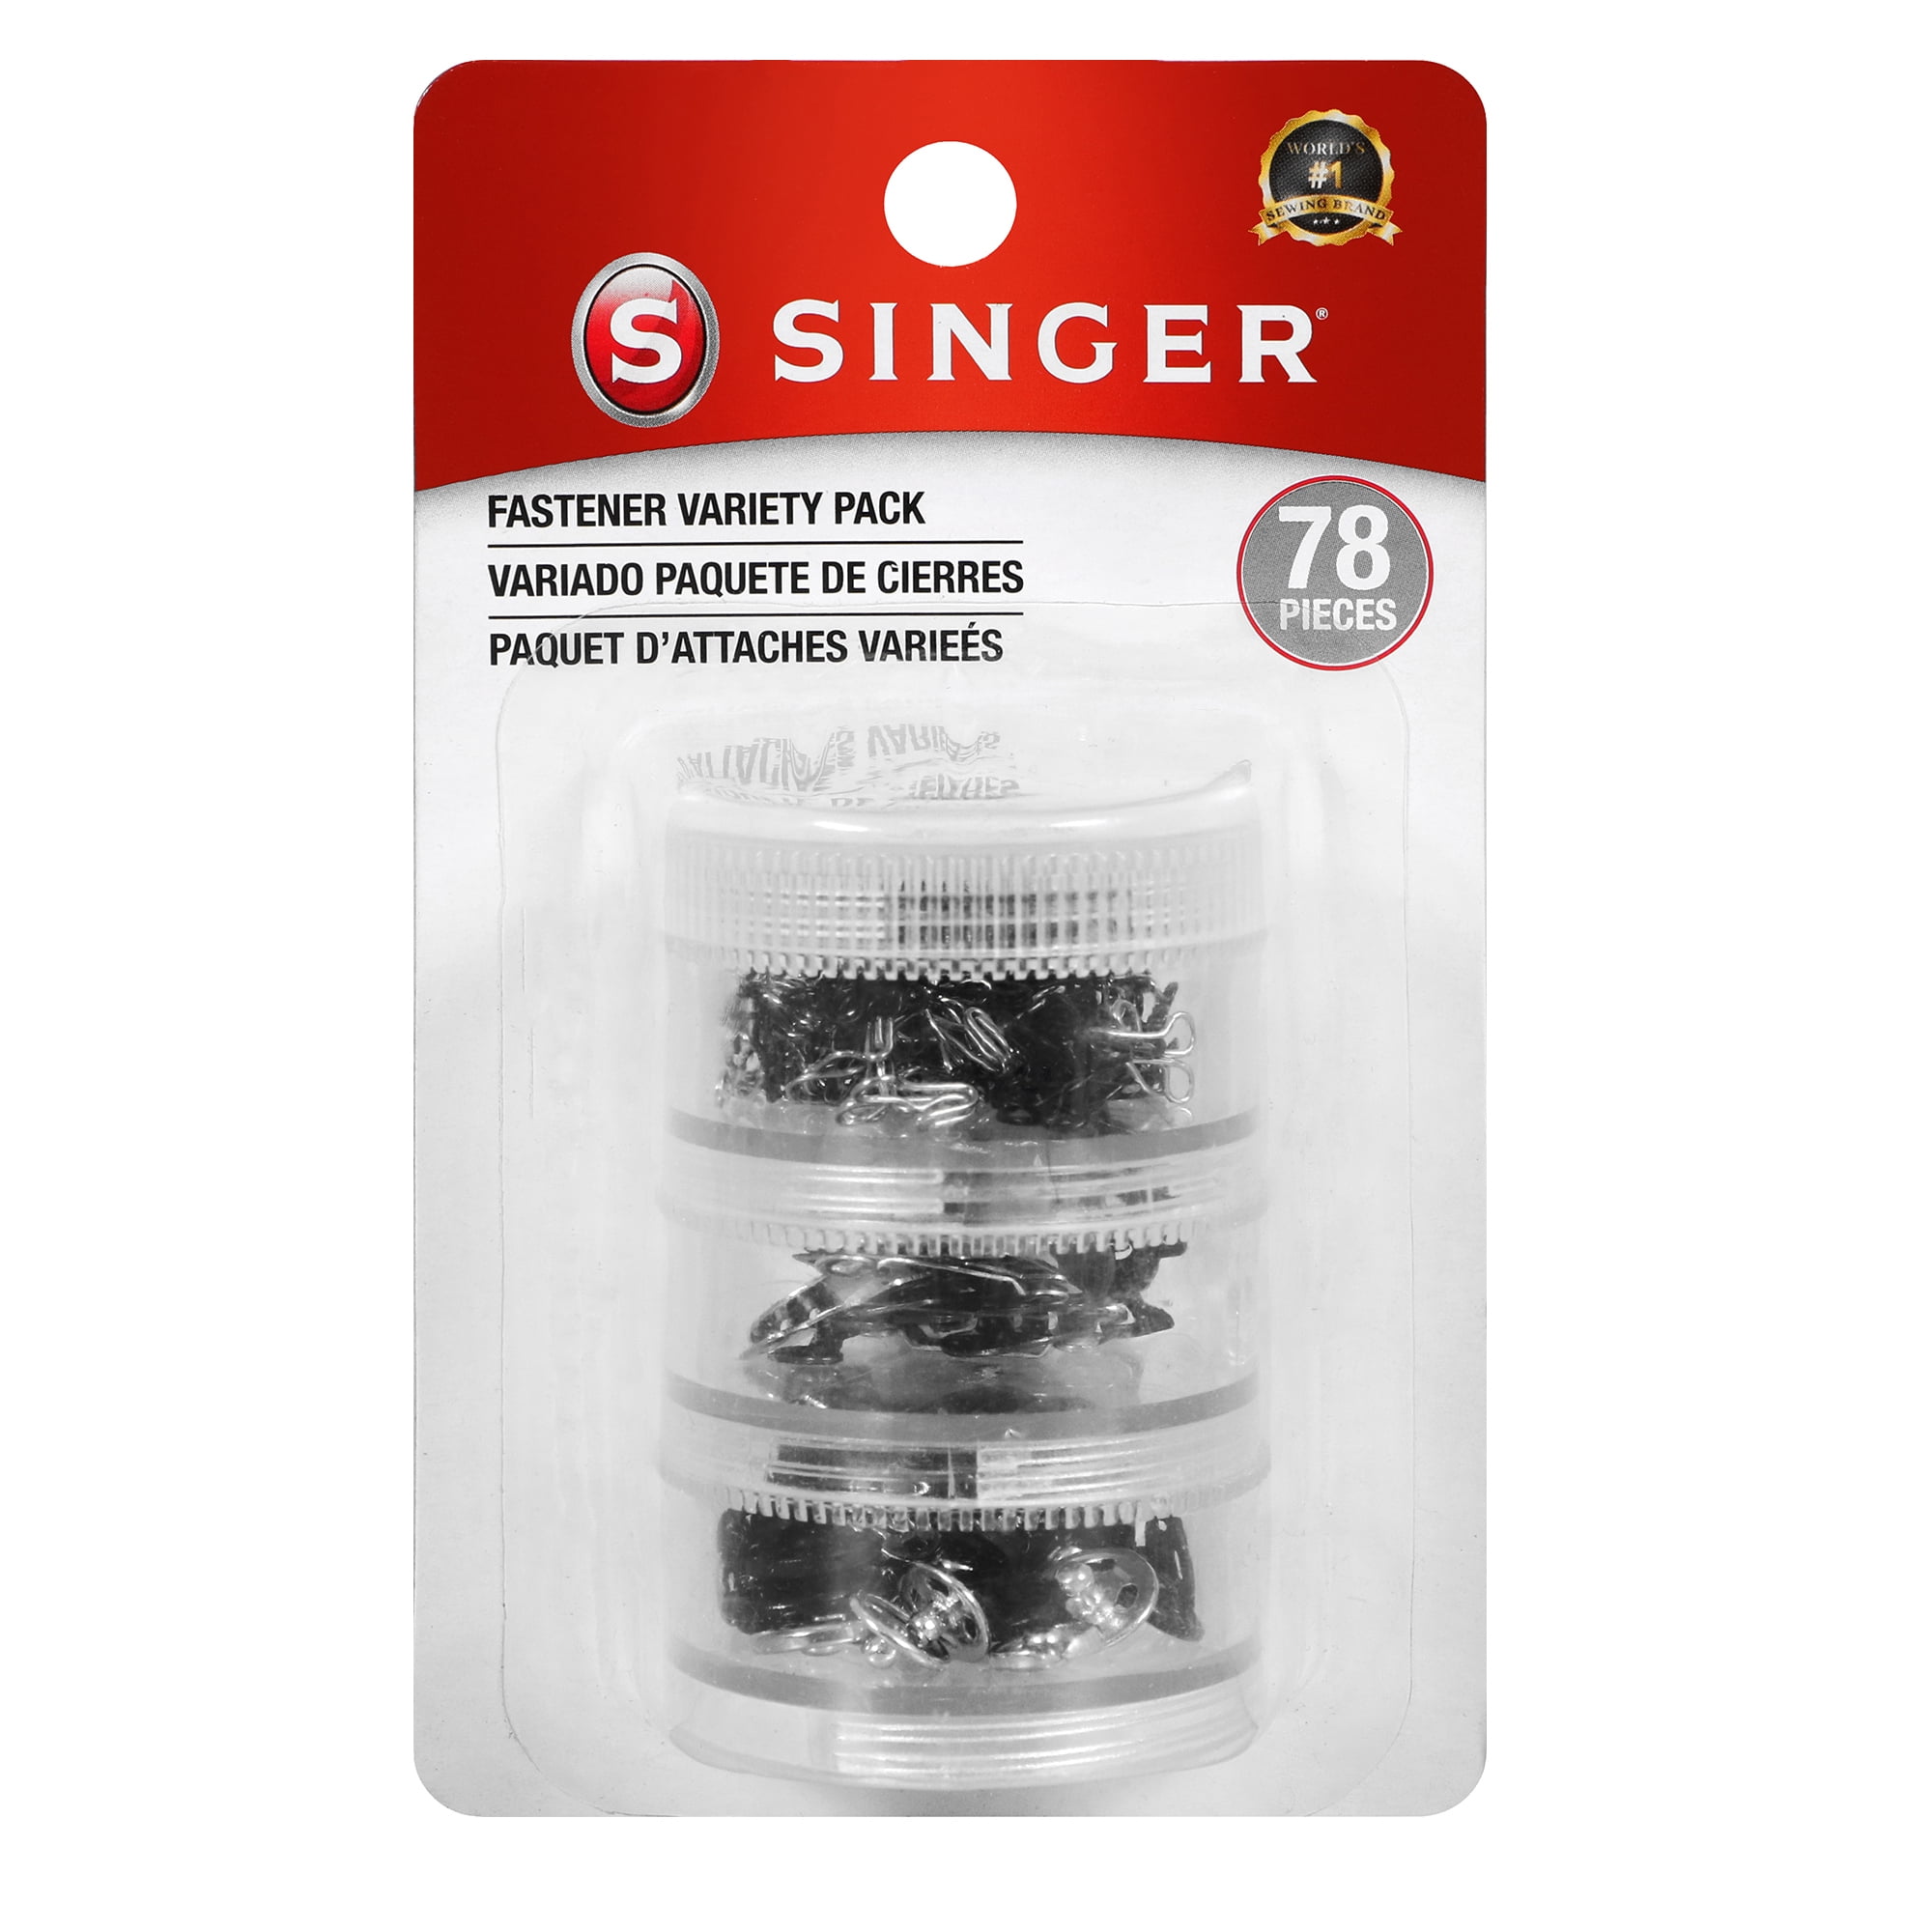 SINGER Fastener Variety Pack in Stackable Container - 48 Hook & Eyes, 24 Sew-On Snaps, 6 Hook & Bars